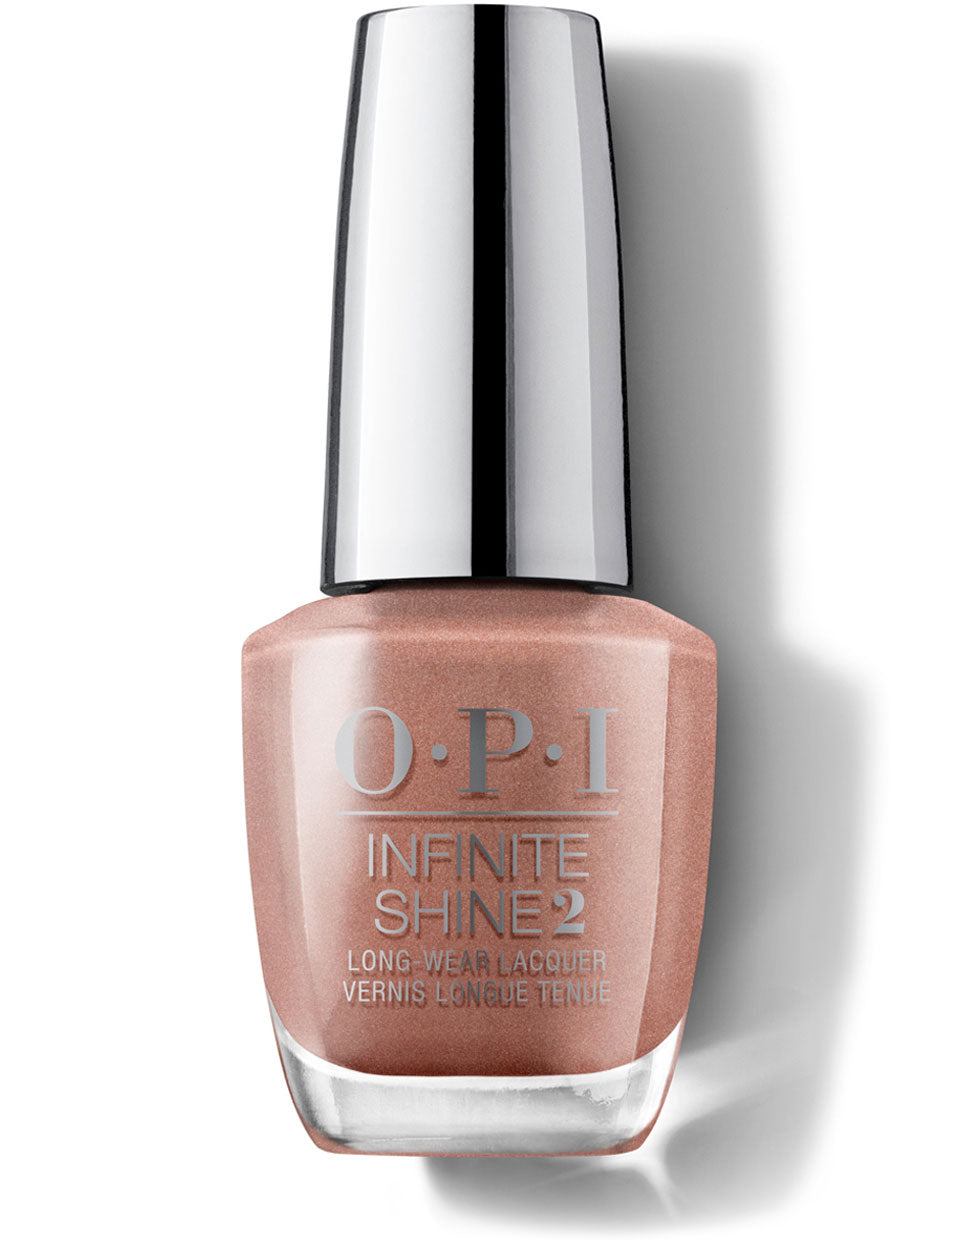 D - Opi Infinite Shine ISL L15 MADE IT TO THE SEVENTH HILL!